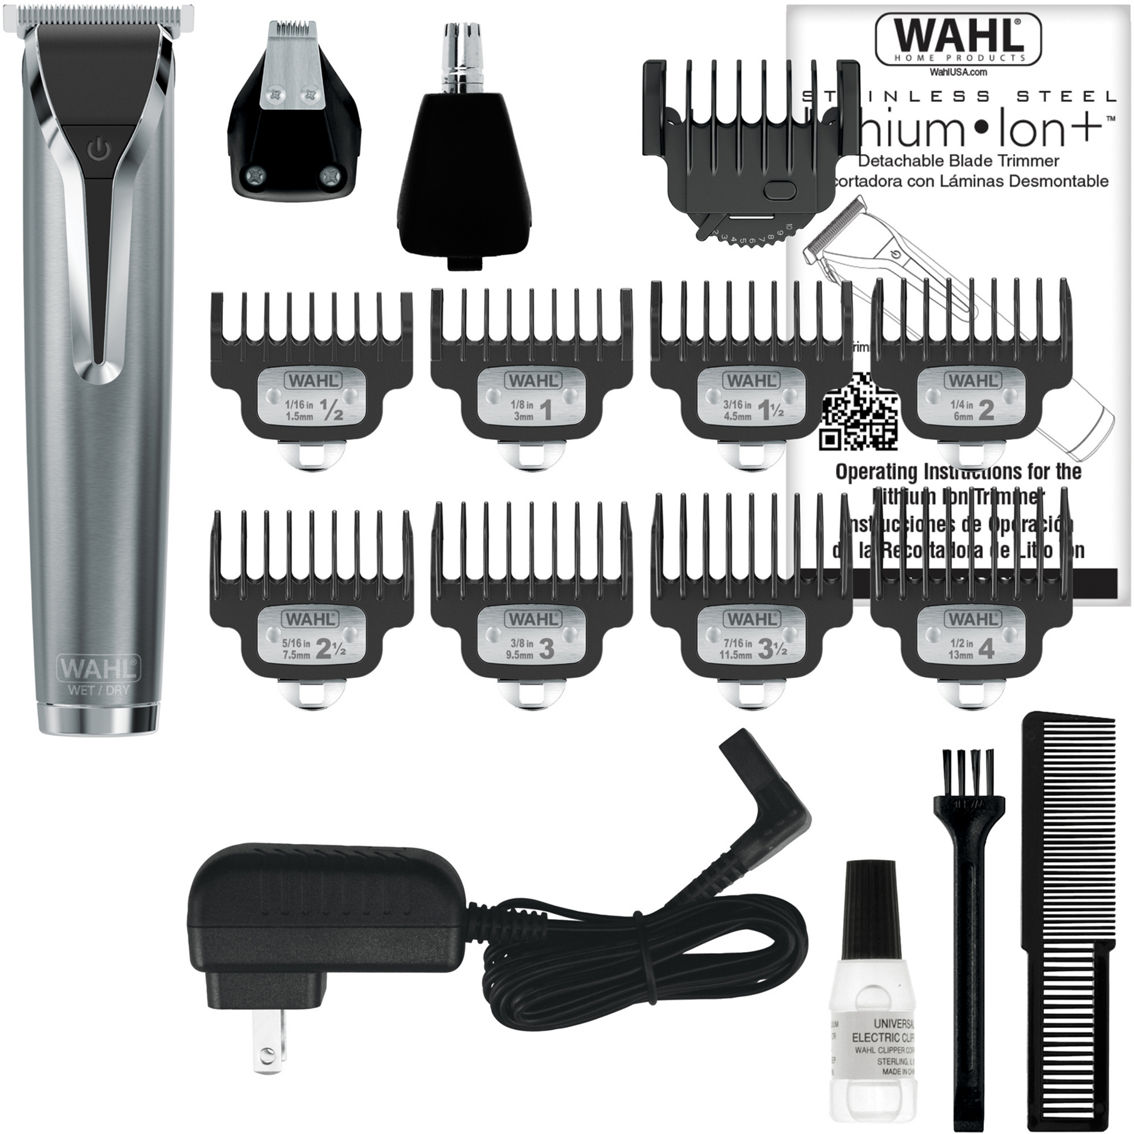 Wahl Stainless Steel Lithium Ion Trimmer - Image 2 of 3